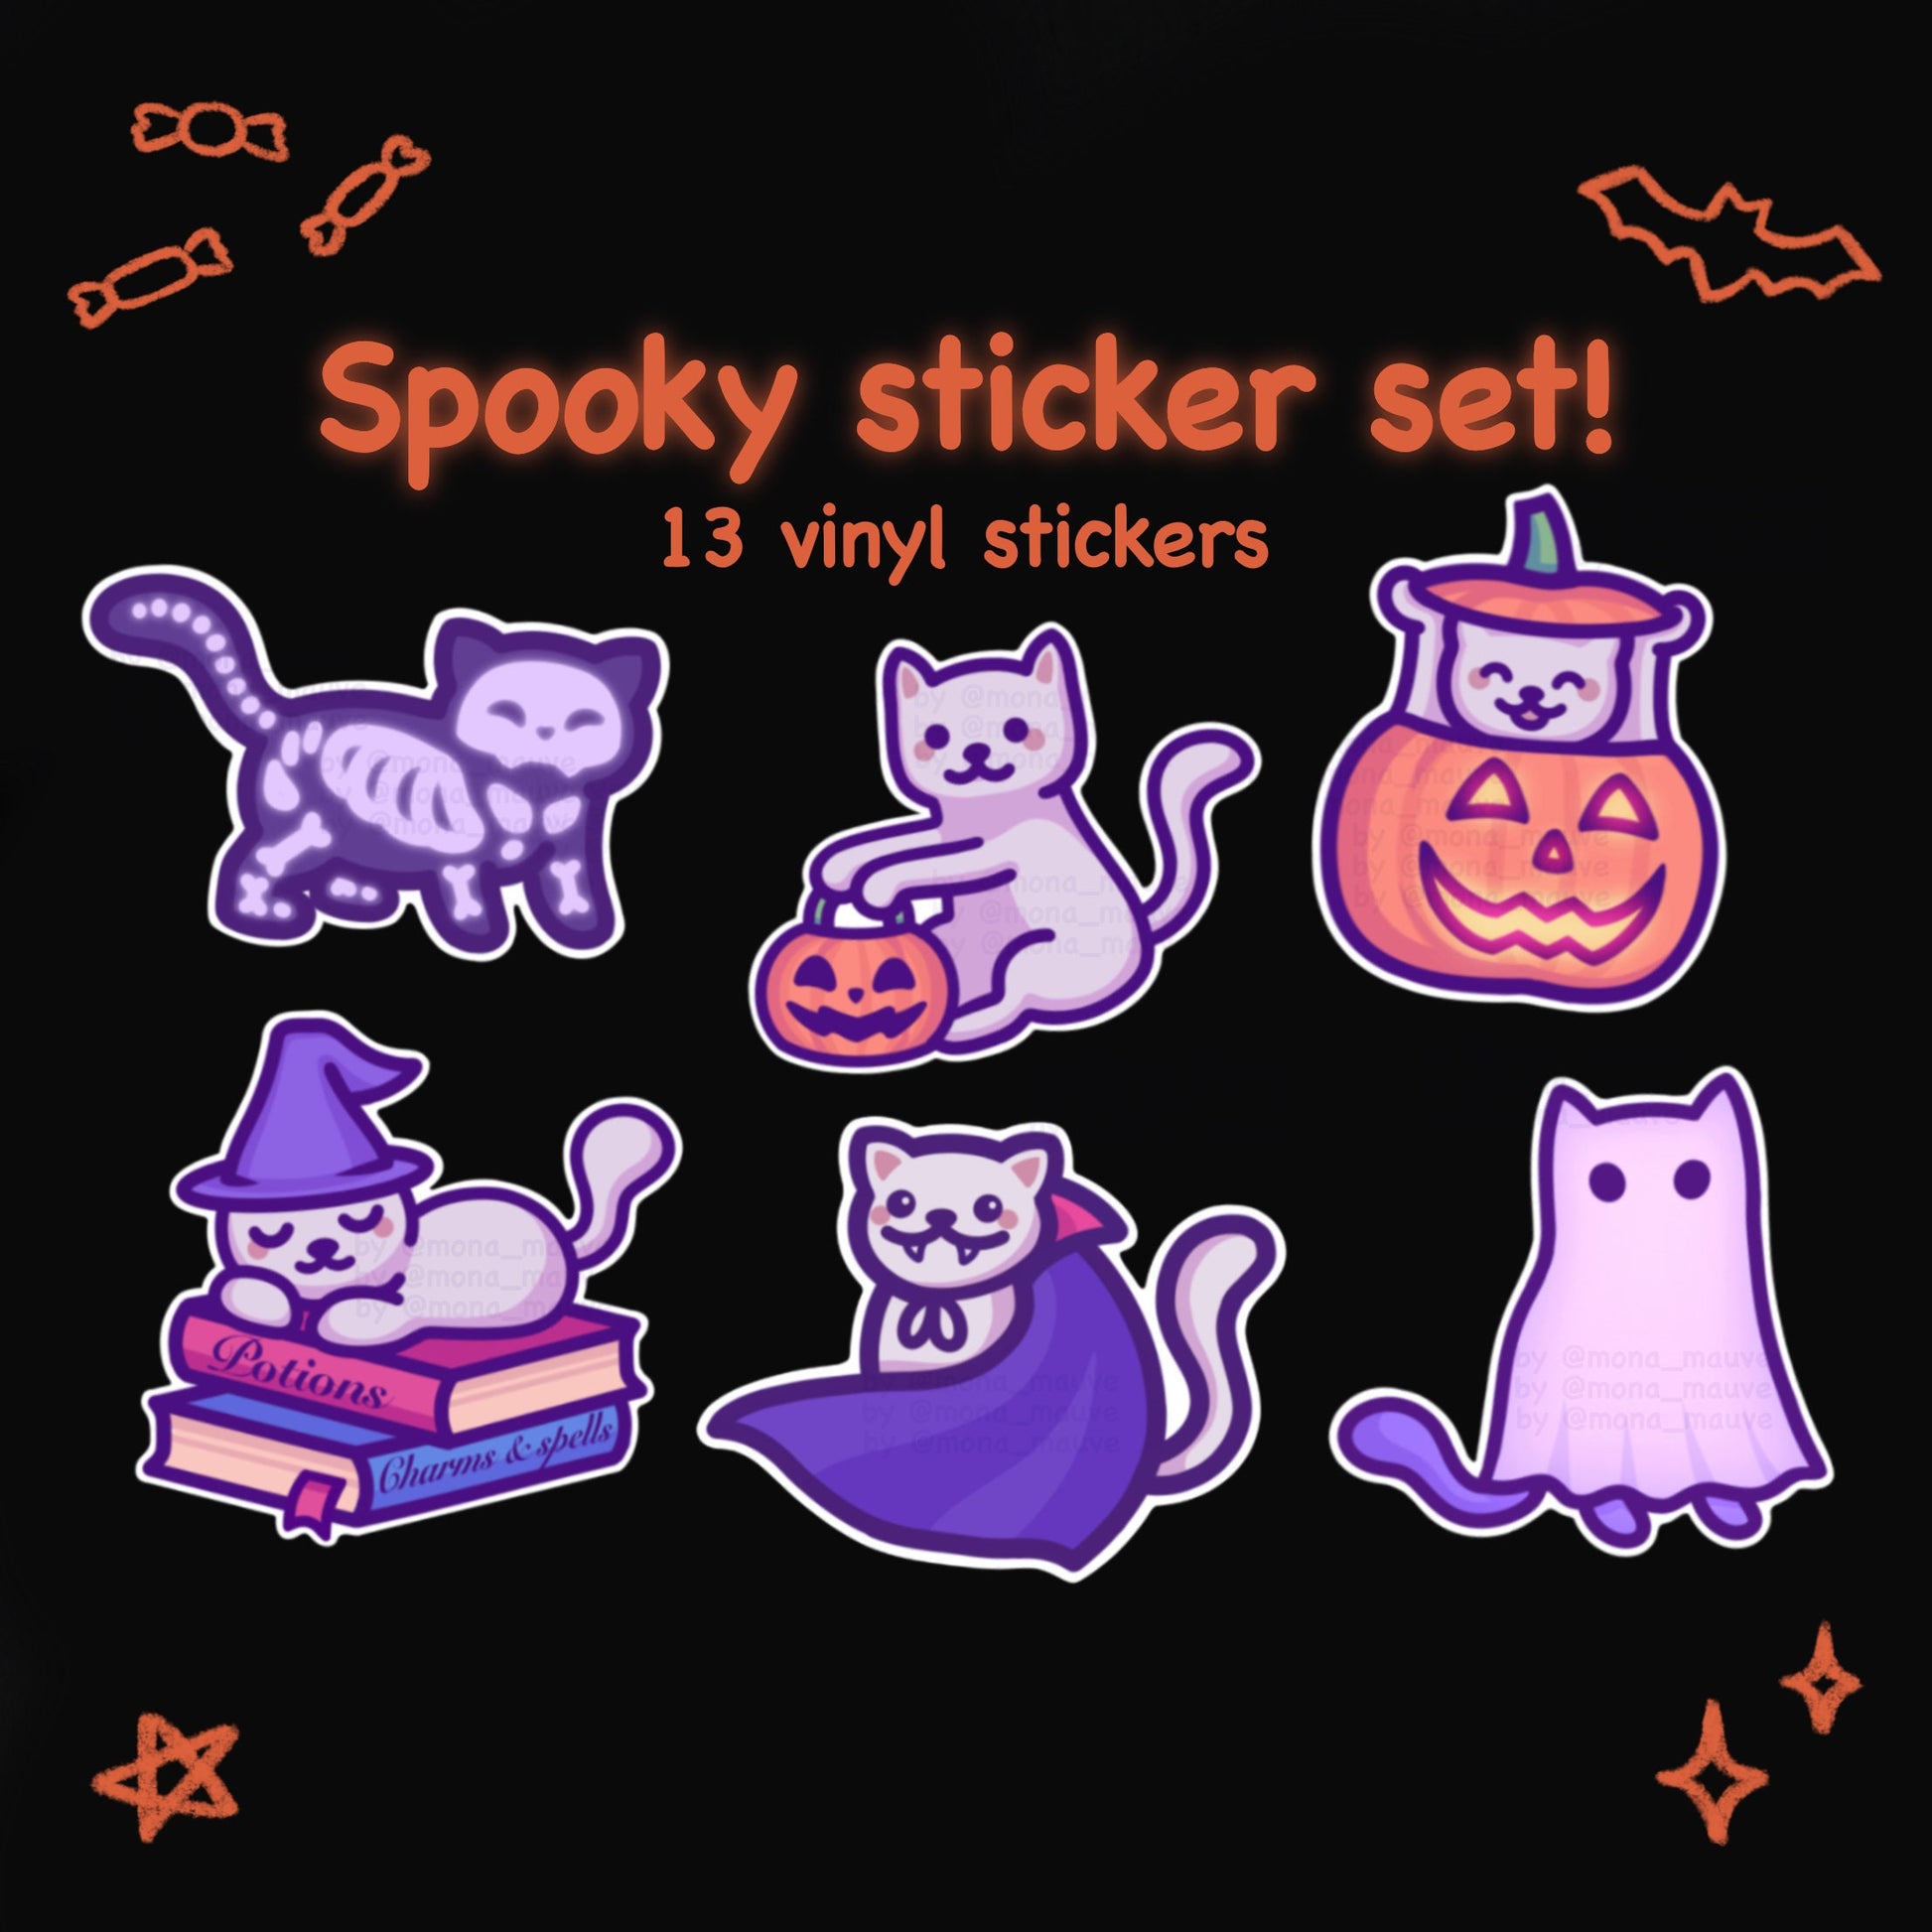 Halloween Cats Sticker by Swig Life for iOS & Android